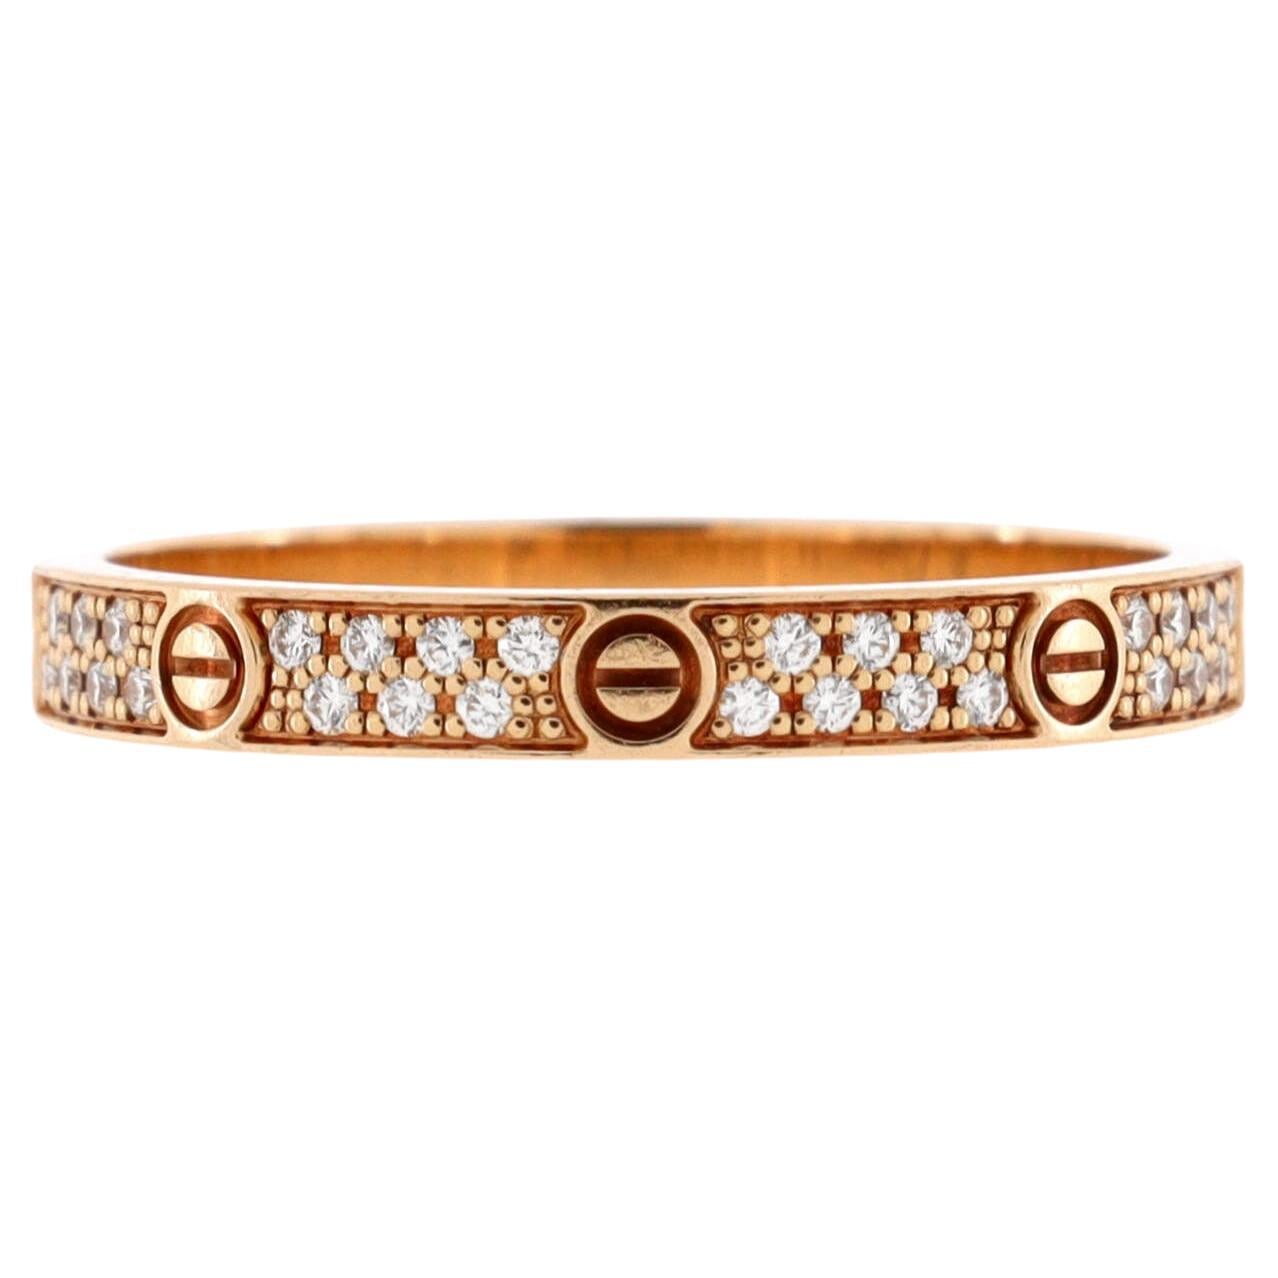 Cartier Love Wedding Band Pave Diamonds Ring 18k Rose Gold and Diamonds Small